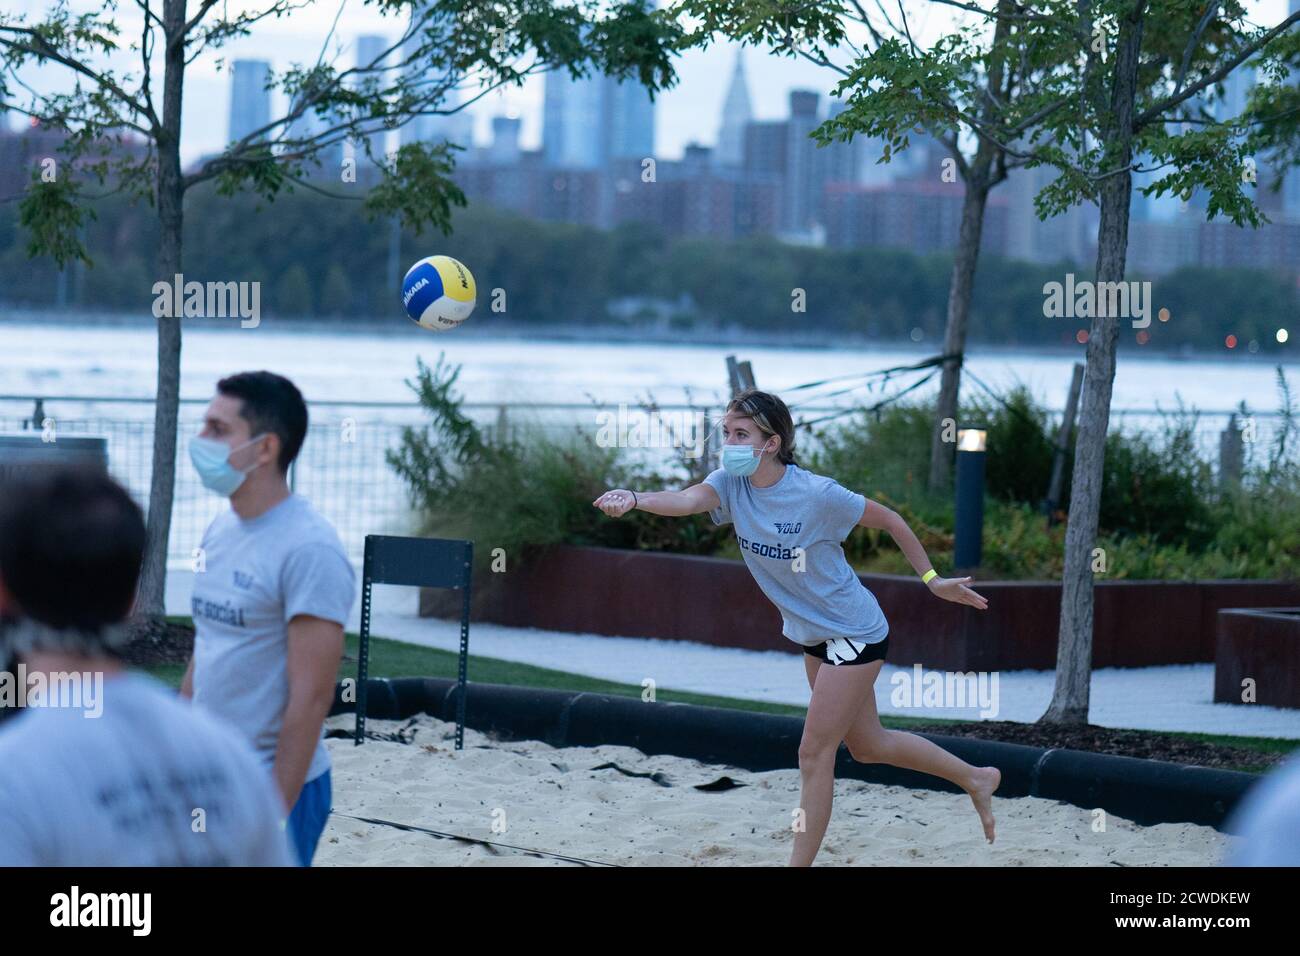 A woman wearing a face mask, playing volleyball at a competition for Volo City Kids Foundation at Domino Park in Williamsburg, Brooklyn.New York City is preparing to move into Phase 4 of re-opening following restrictions imposed to curb the coronavirus pandemic. Phase 4 involves reopening of: Zoos, pro sports, TV and movie crews. Stock Photo